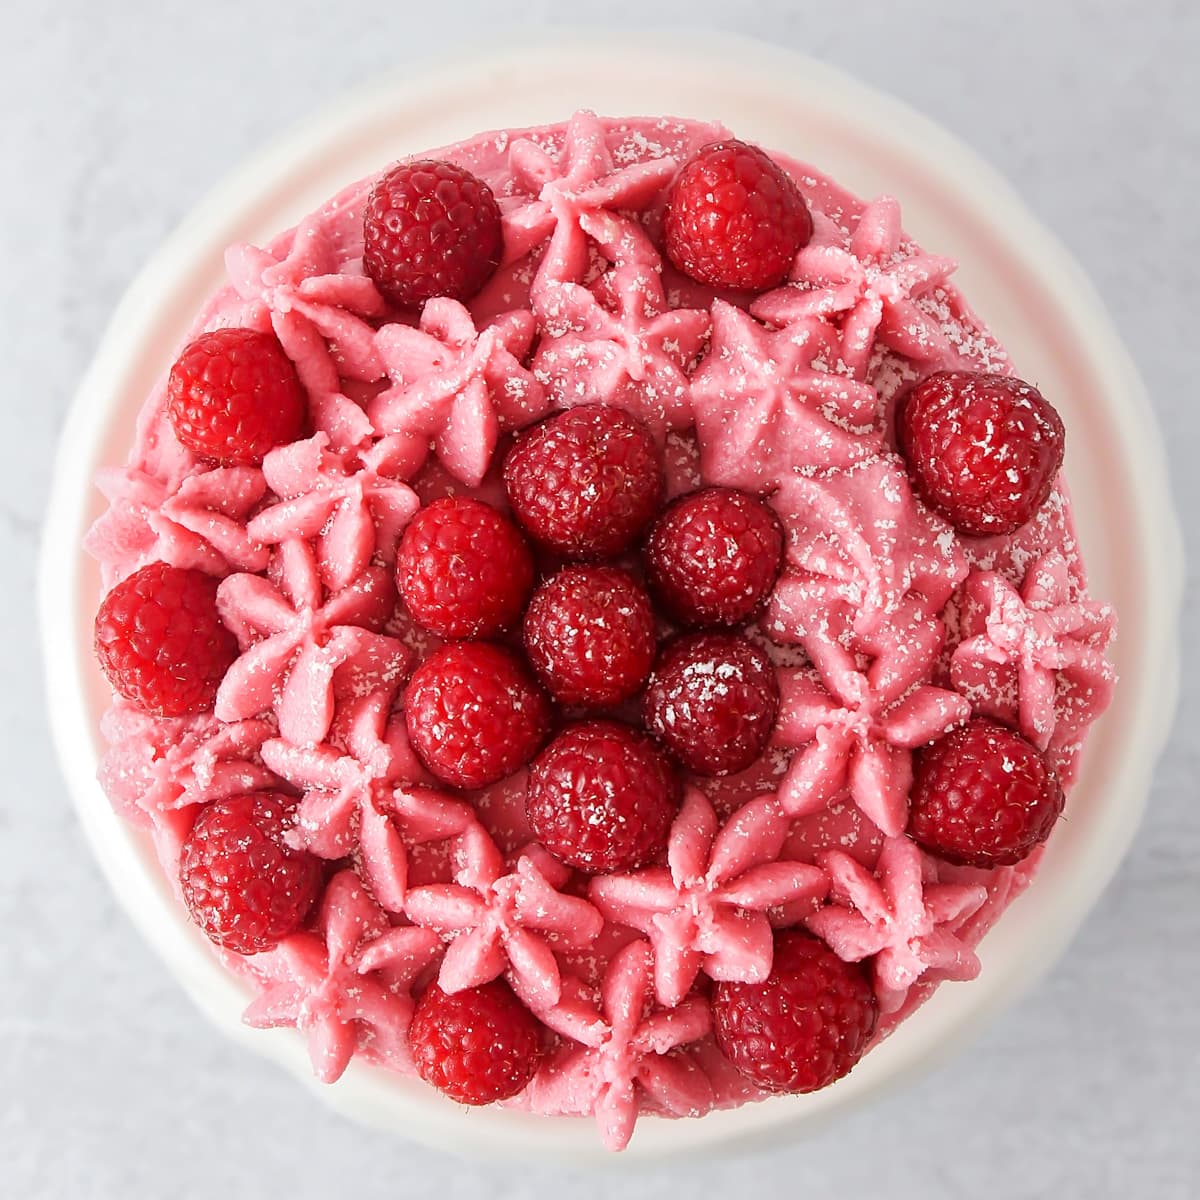 Top view of a cake decorated with raspberry buttercream frosting and fresh raspberries.